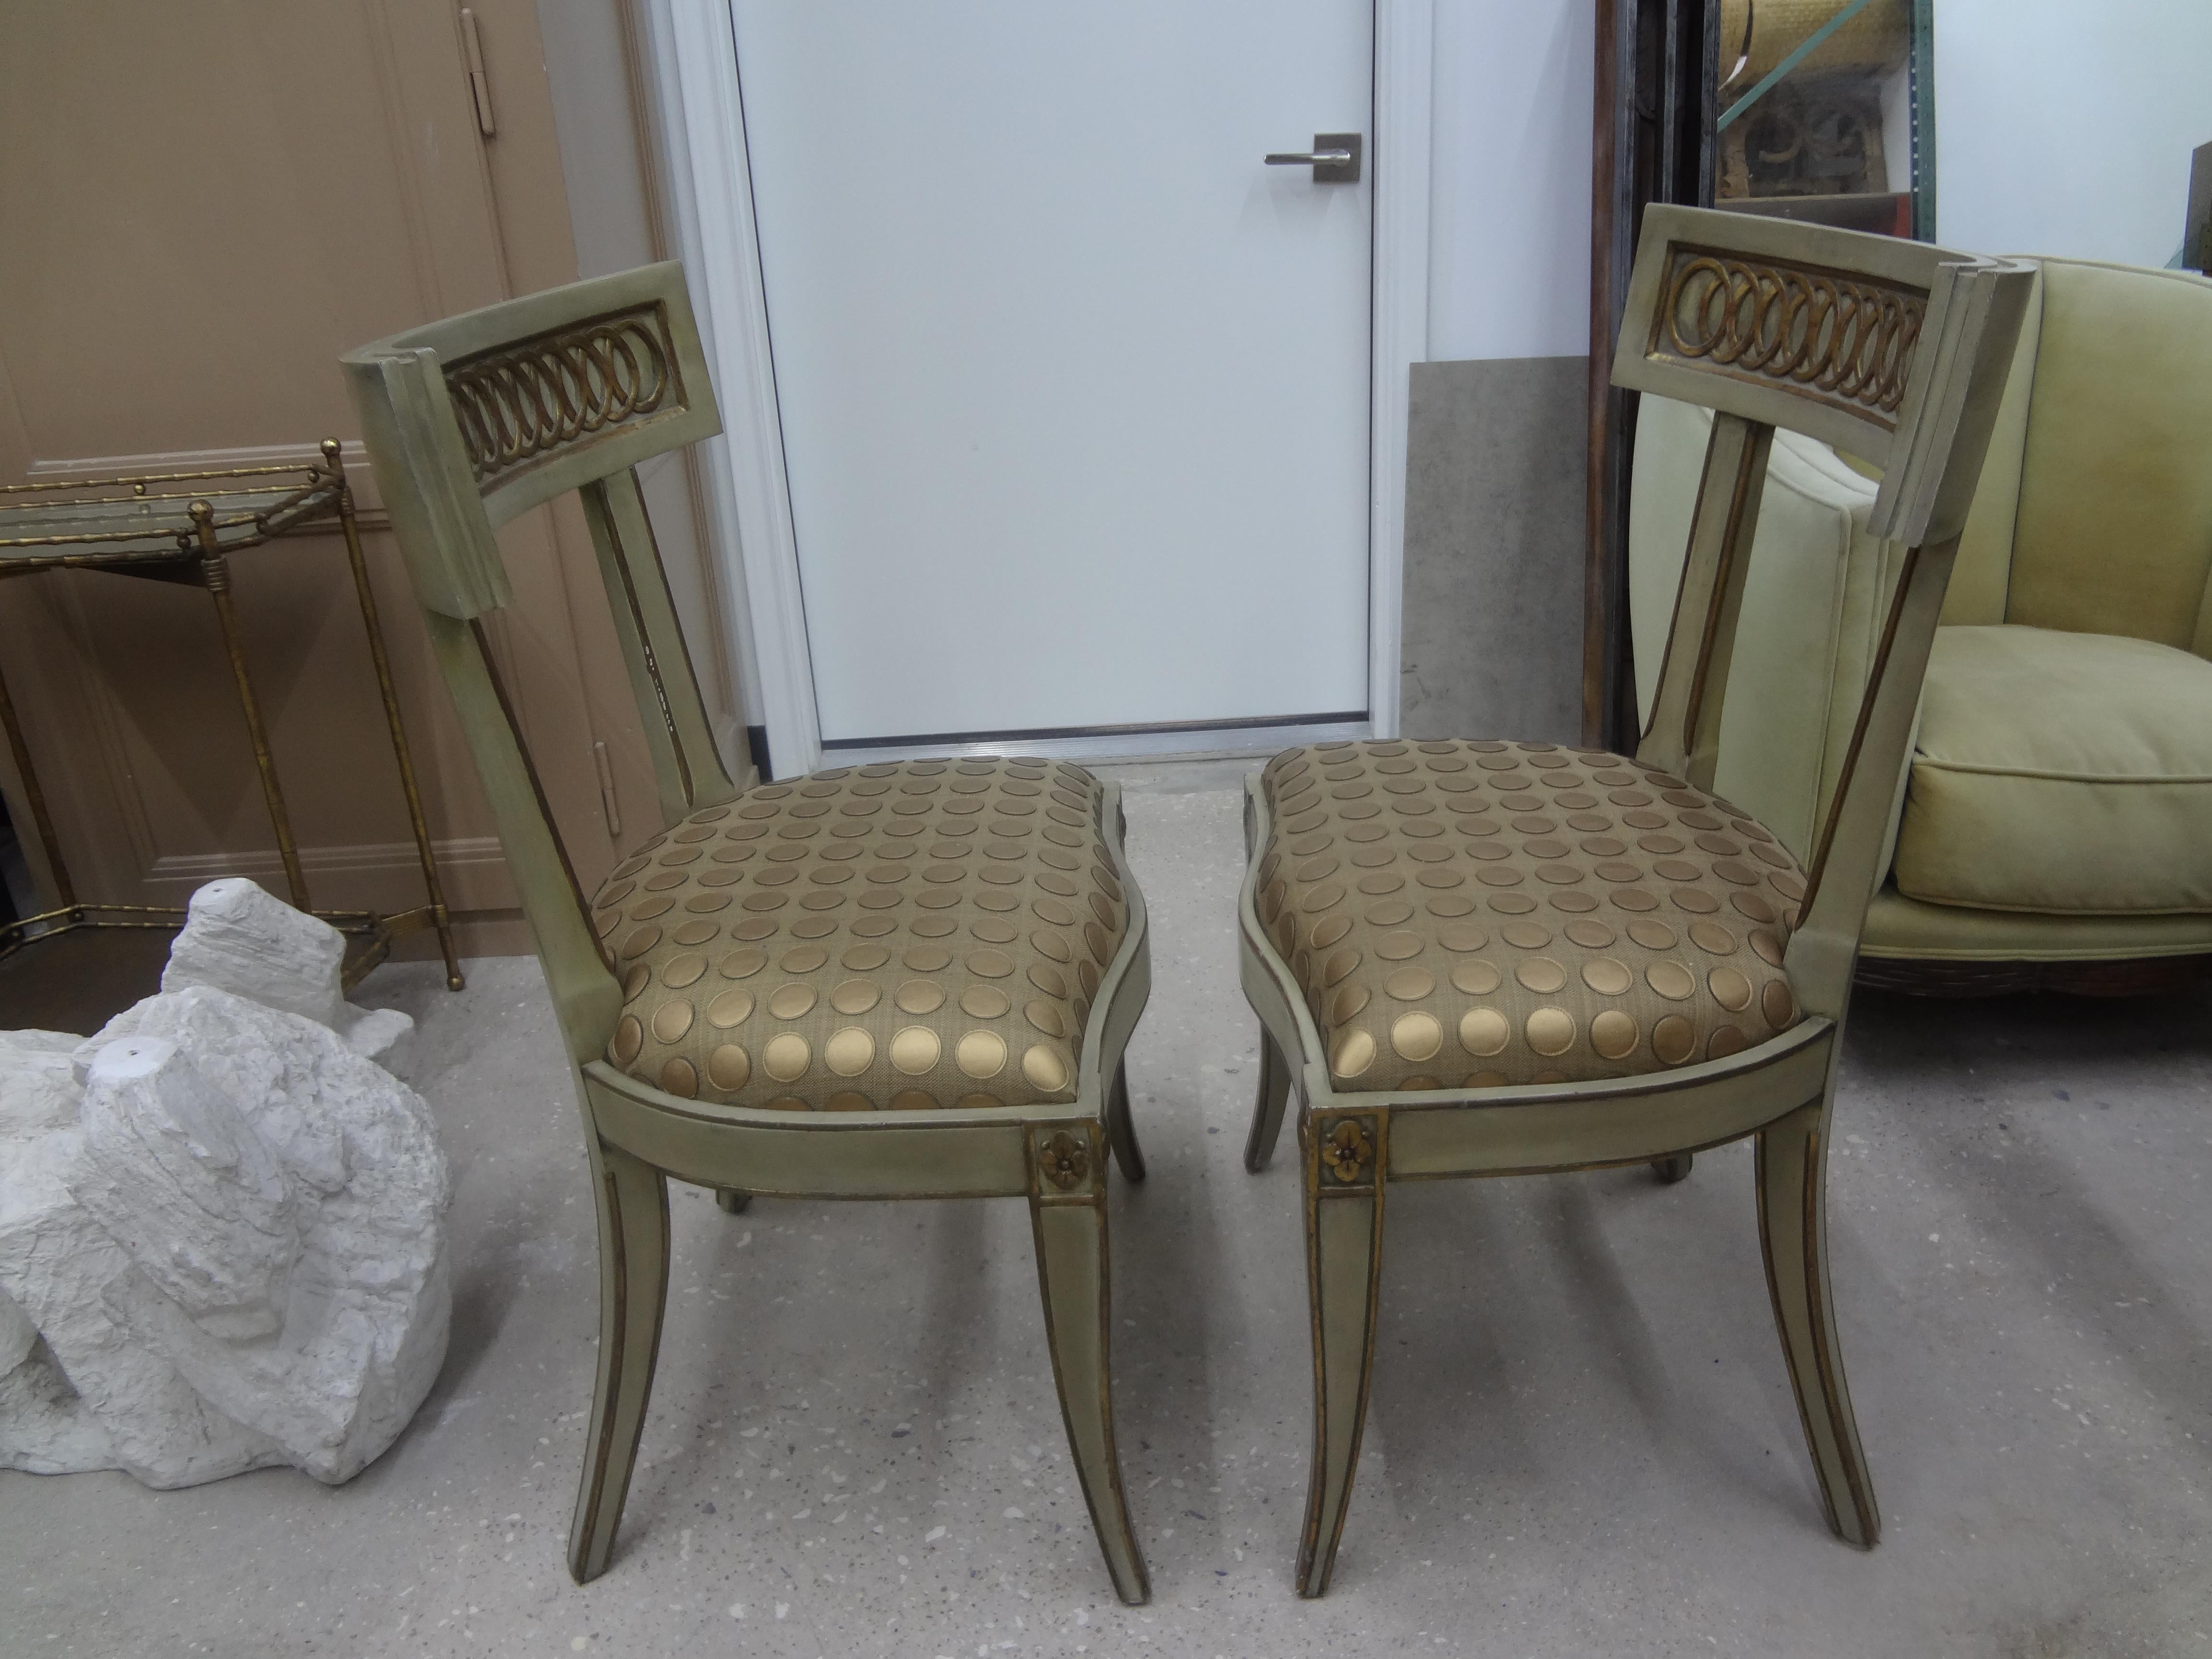 Stunning pair of Italian Hollywood Regency klismos style chairs. These chic high style Italian side chairs are painted a soft gray/green with gilt accents and have great splayed legs or saber legs. Our vintage Klismos chairs make great entrance